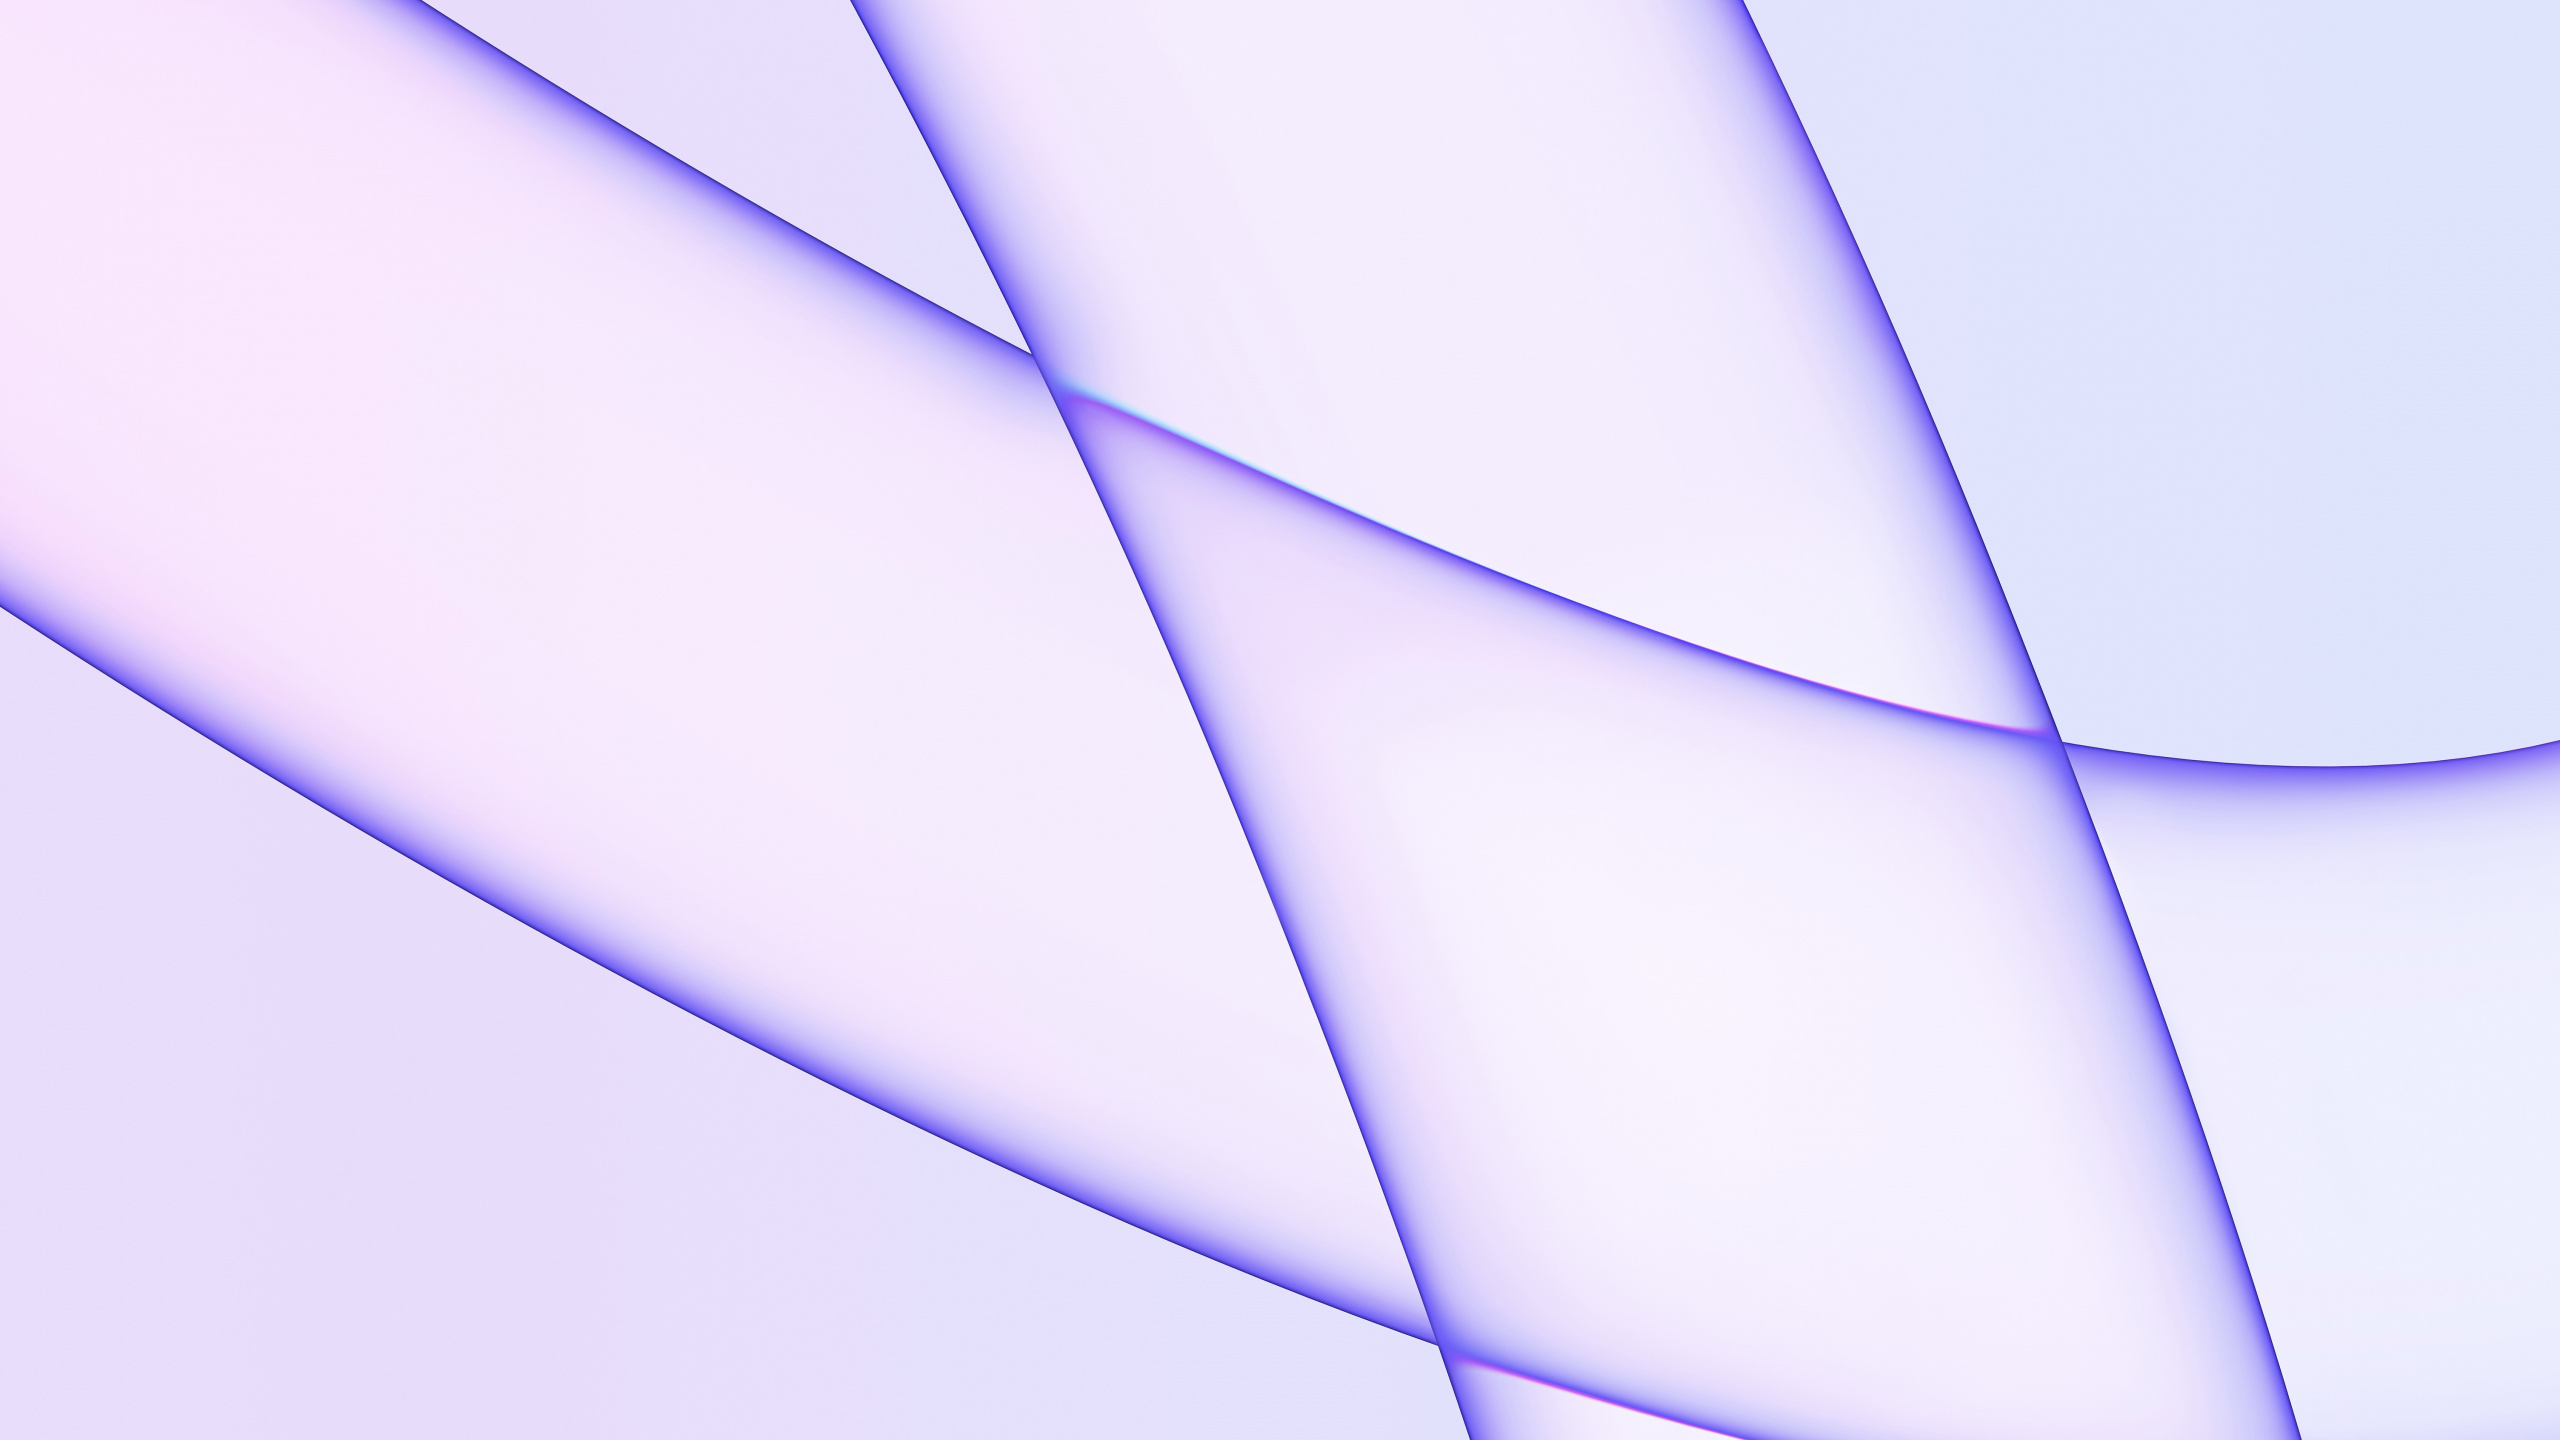 IMac Color Matching Wallpaper in Light Purple for IPad or Desktop. Wallpaper in 2560x1440 Resolution